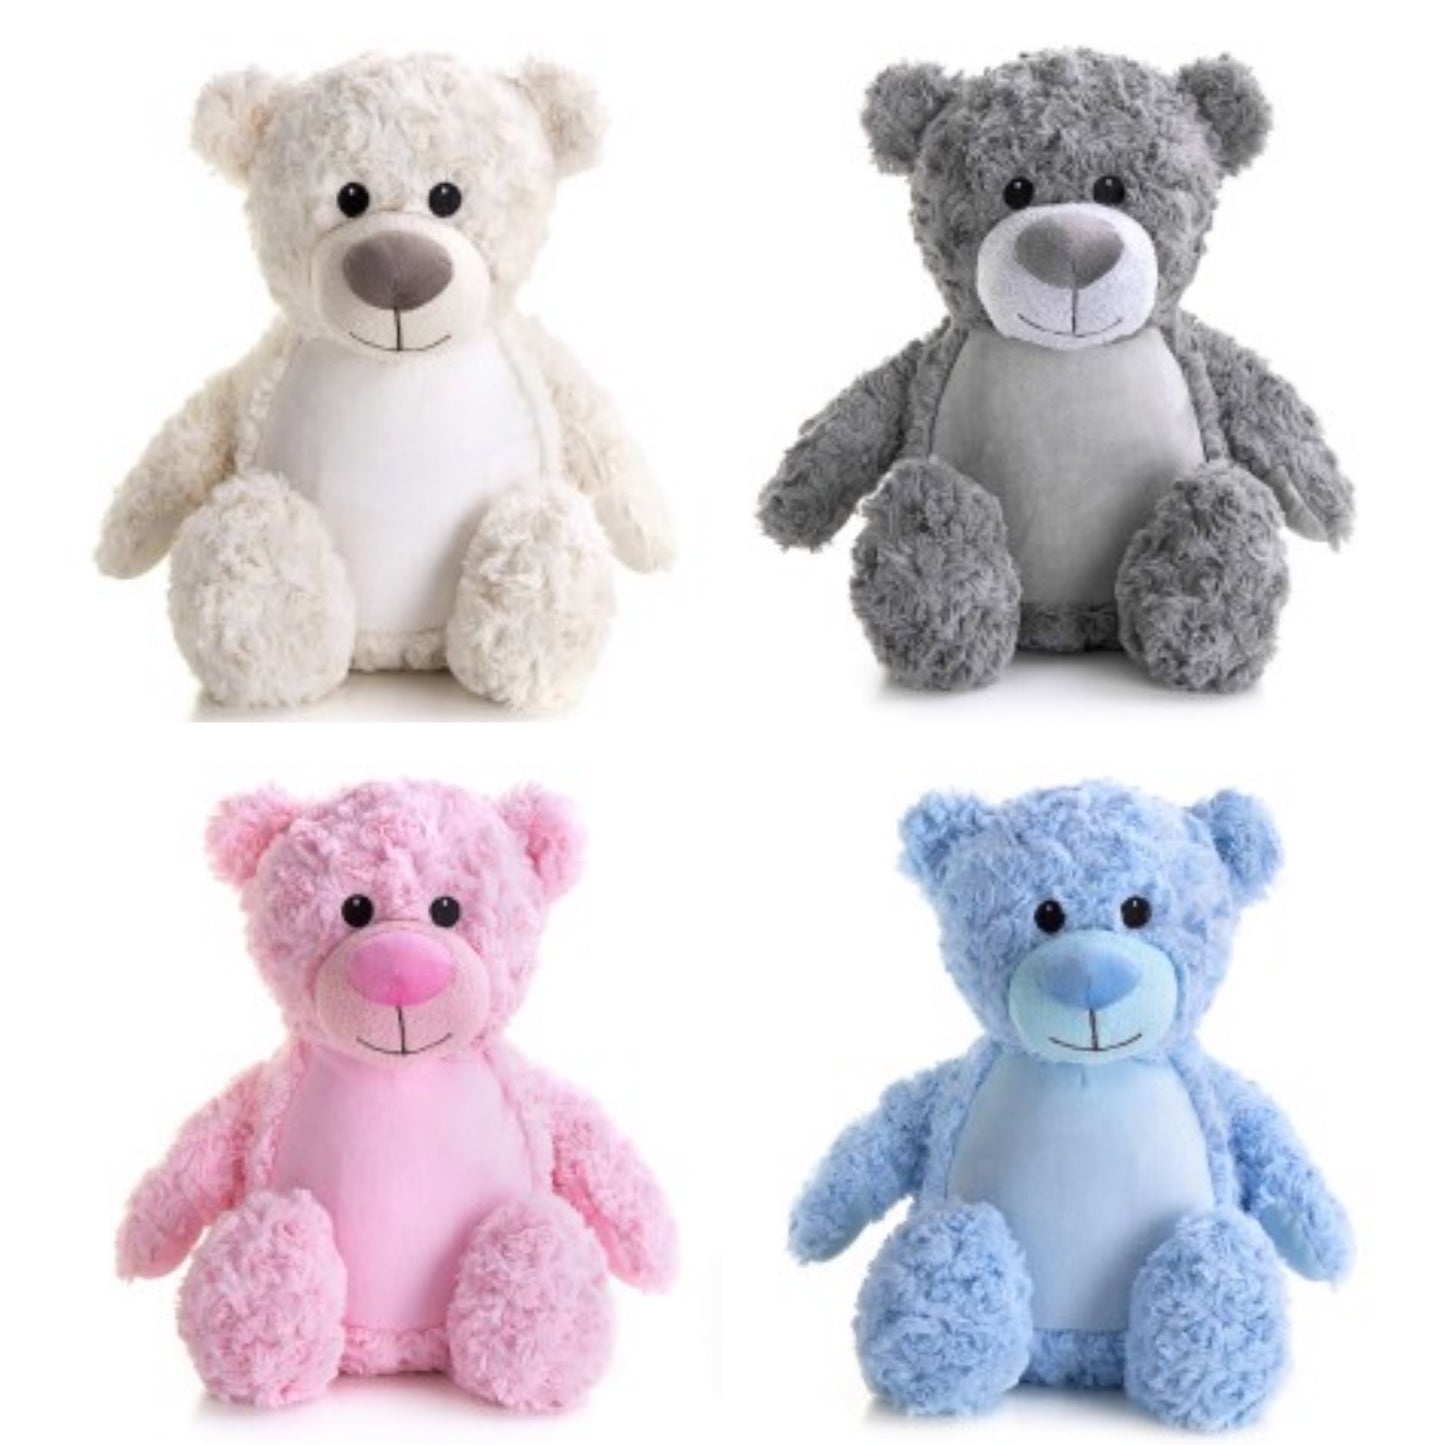 Personalised Create Your Own Teddy Bear